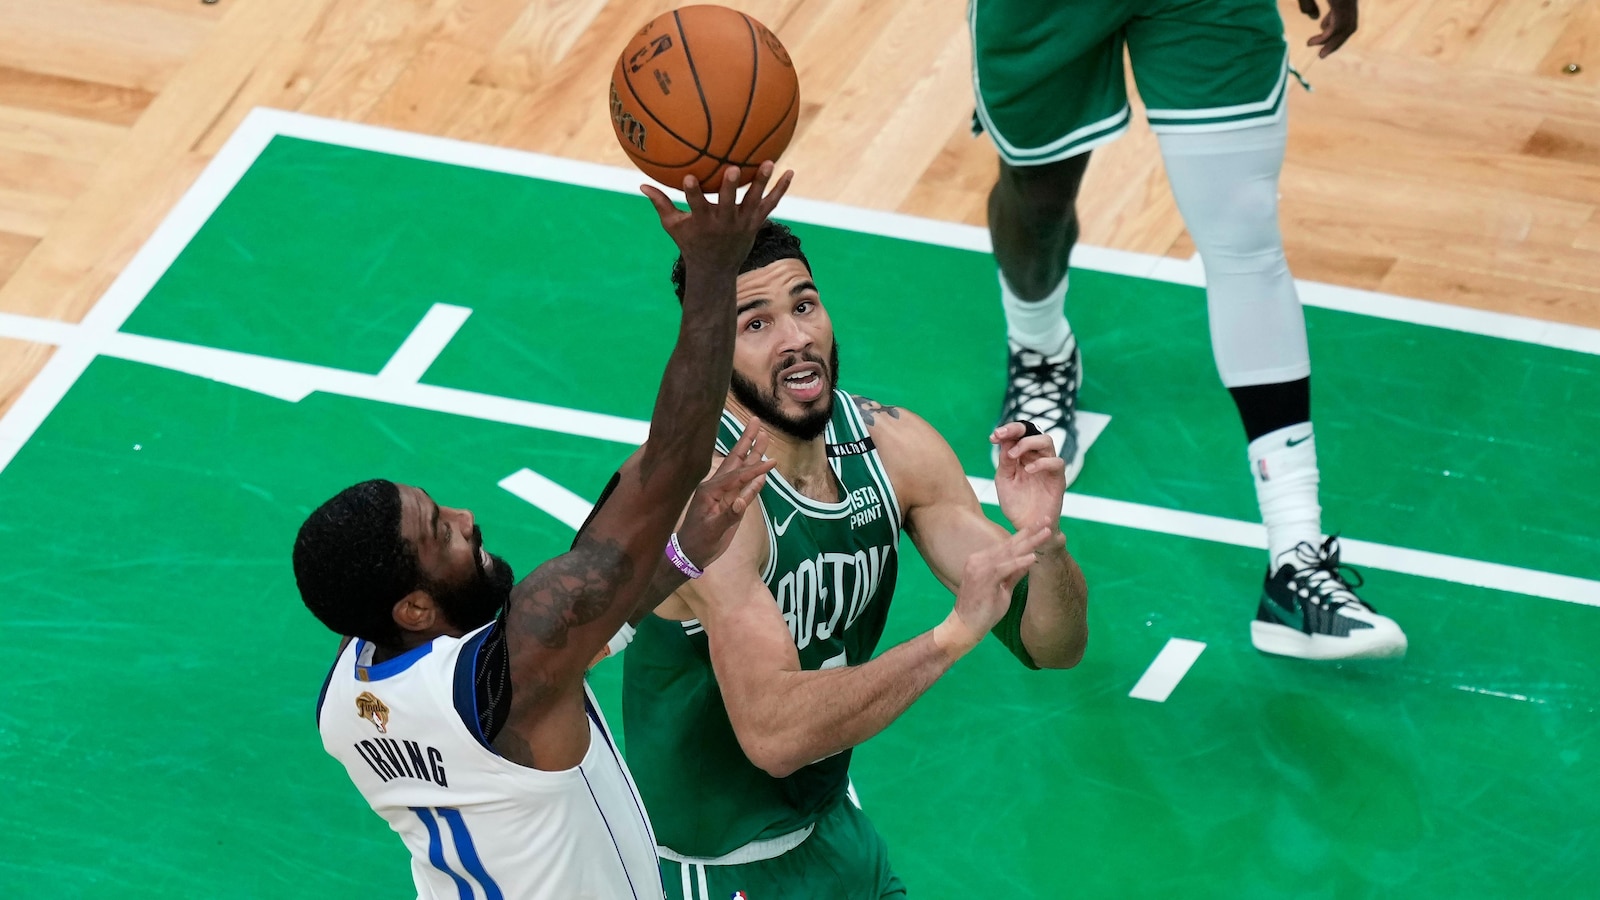 The Boston Celtics secure their 18th NBA championship with a dominant 106-88 victory over the Dallas Mavericks in Game 5